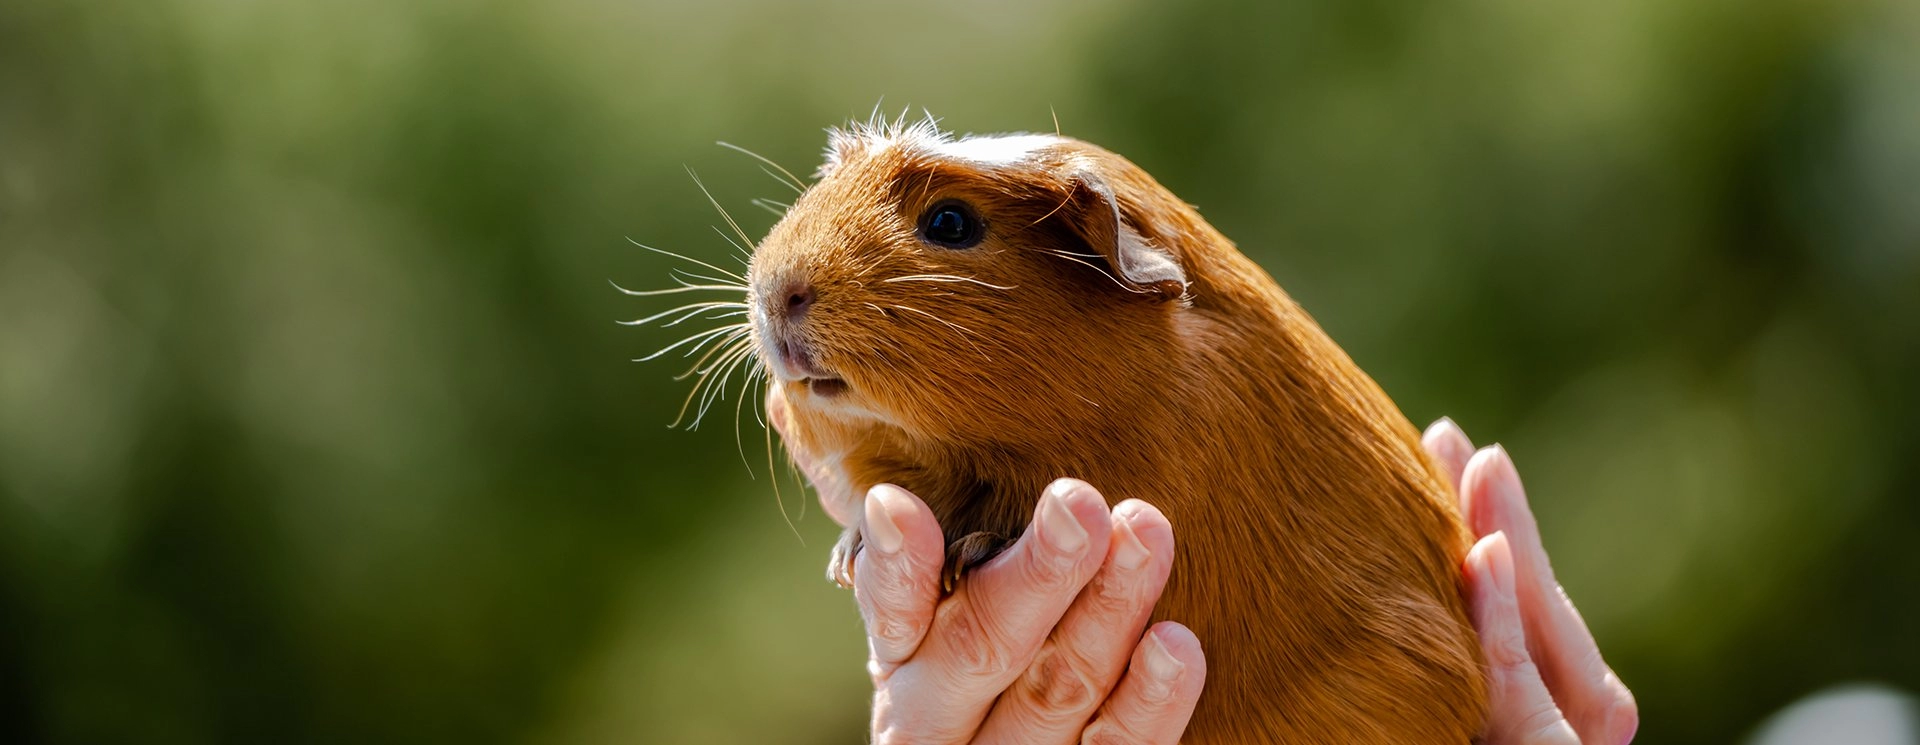 Rabbits & Guinea Pigs for sale in Sydney